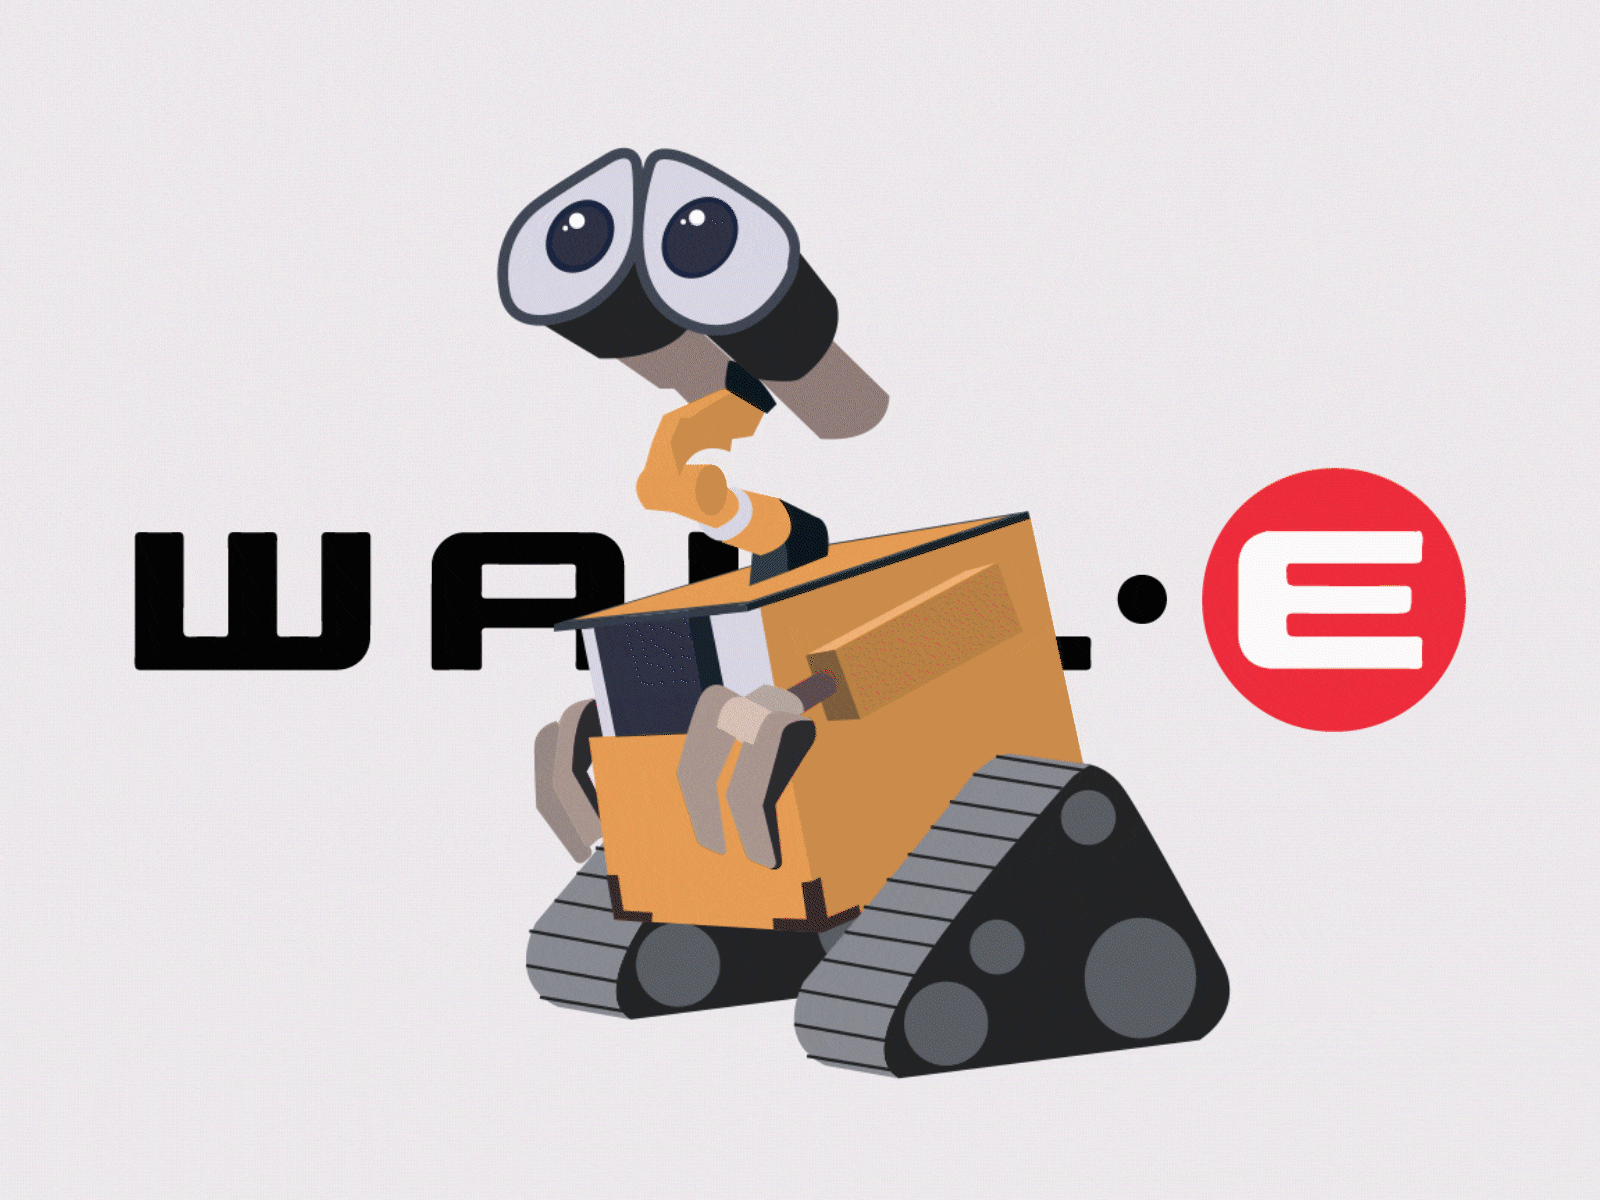 WALL-E 2d animation character character design design graphic design illustration illustrator tribute tribute video vector wall e movie walle